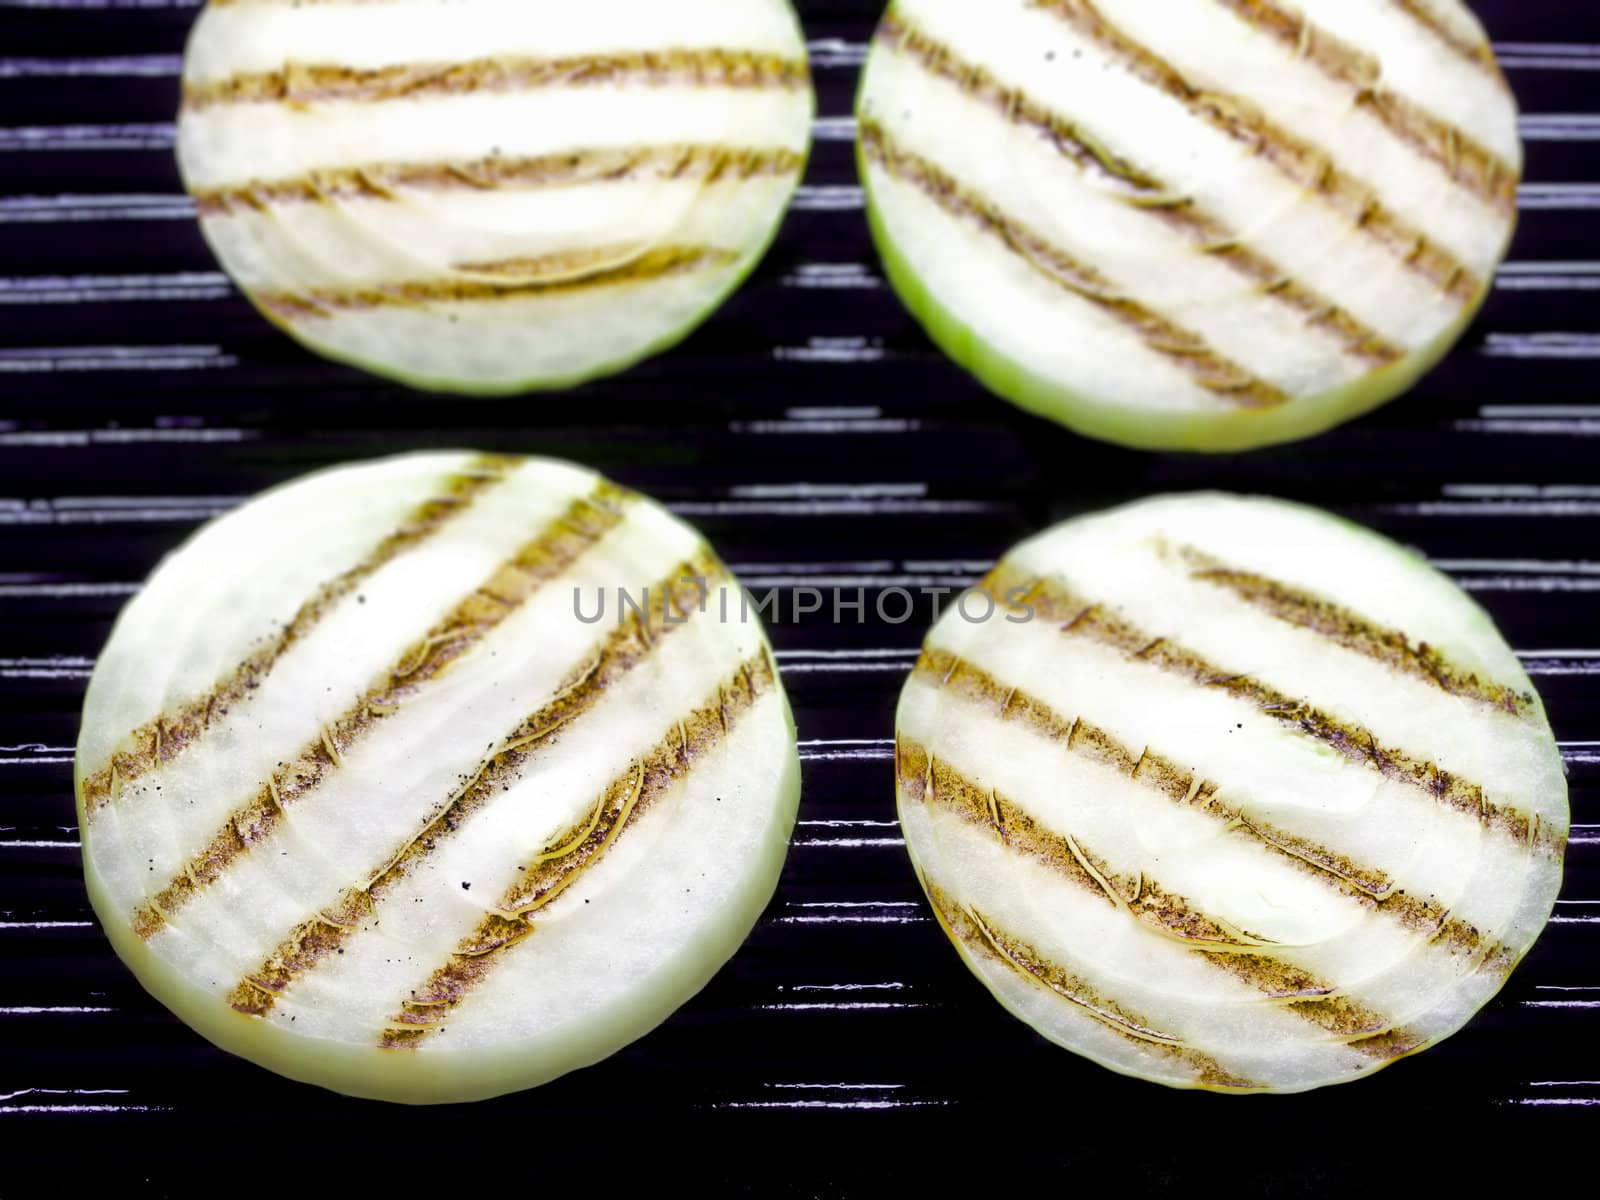 grilled onions by zkruger